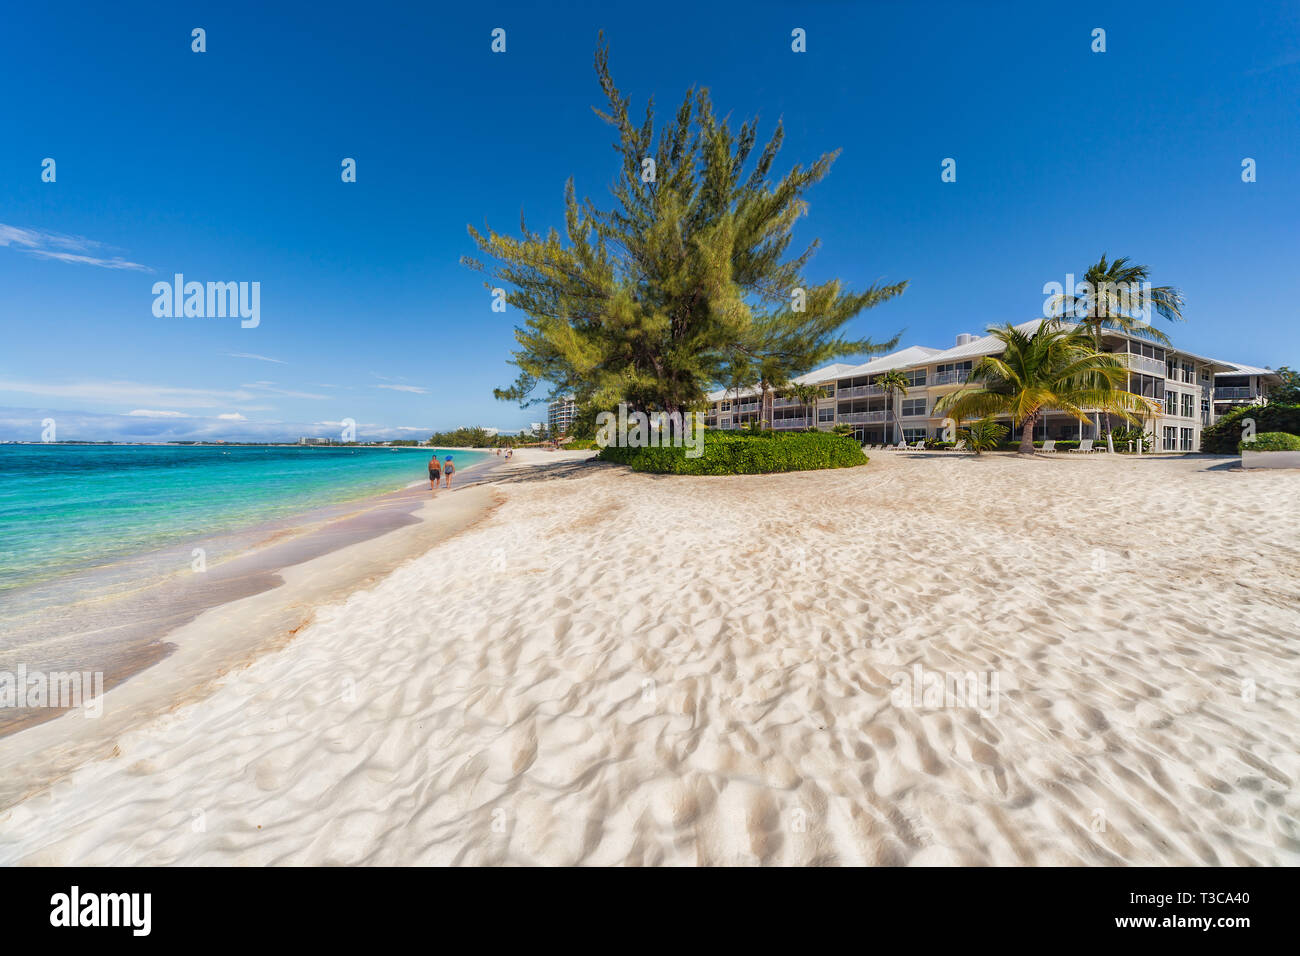 Seven mile beach on Grand Cayman in the Caribbean. Stock Photo